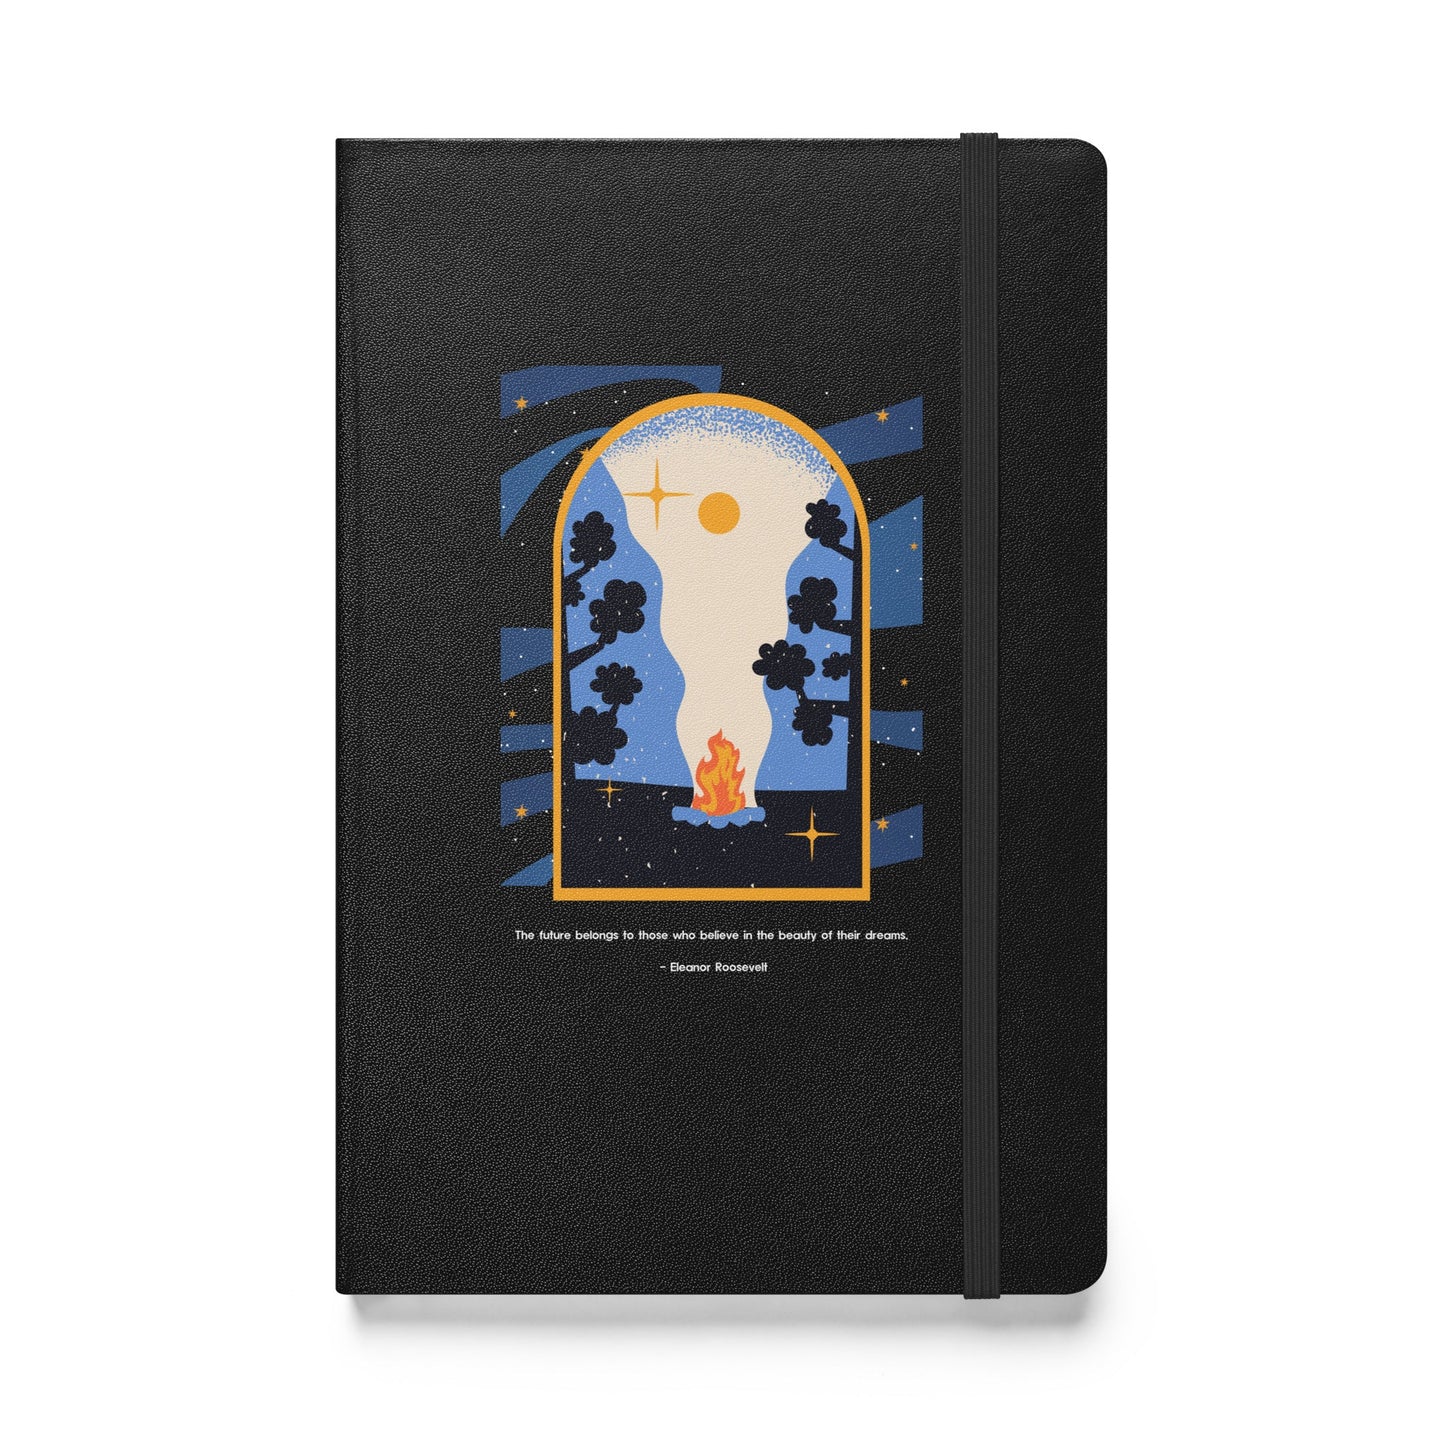 Minimal Scenery Hardcover Bound Notebook - Your Journey Awaits